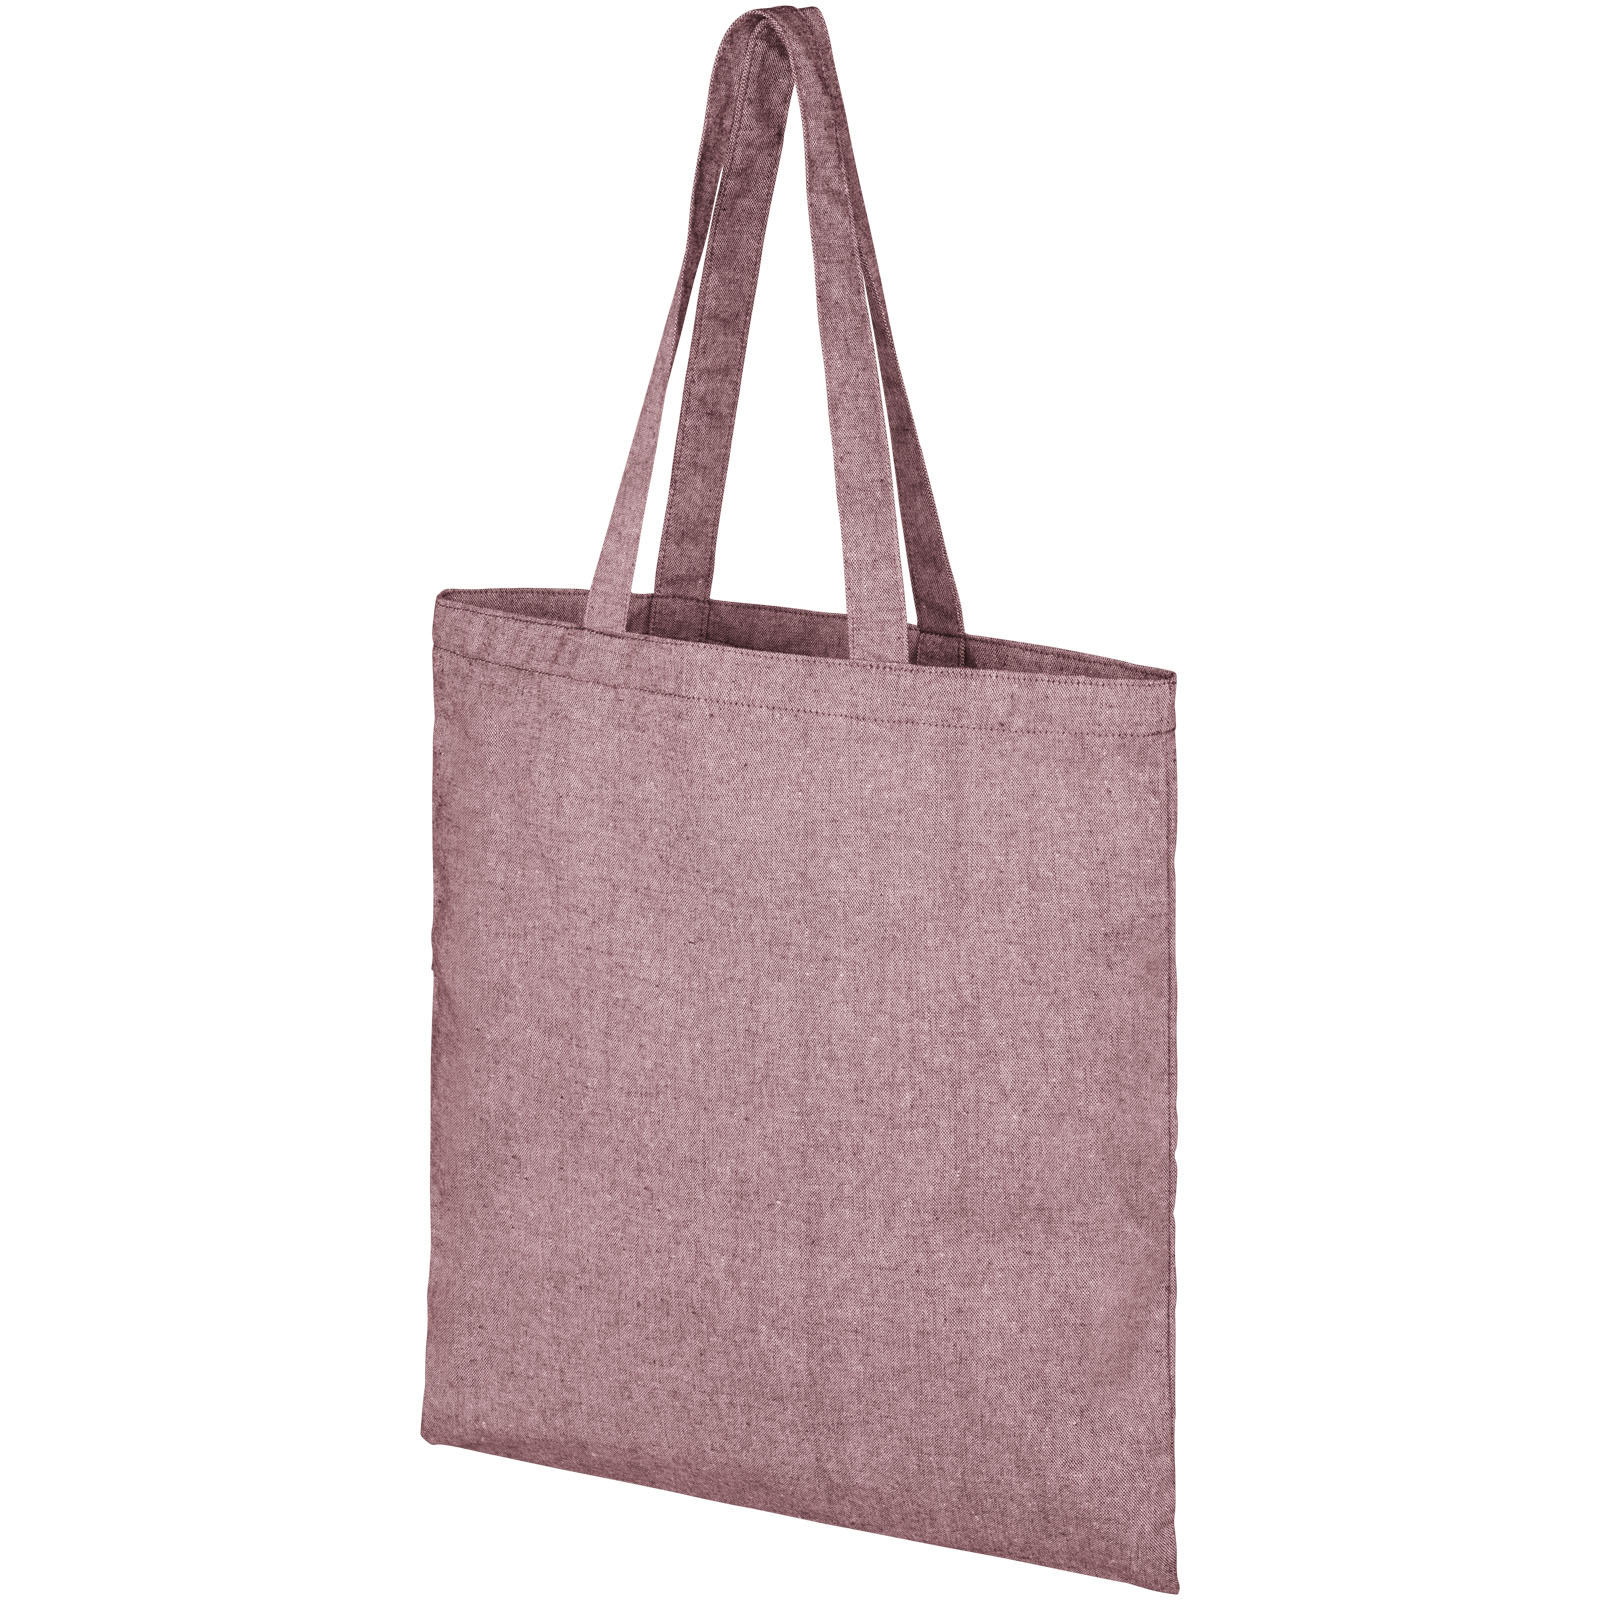 Shopping & Tote Bags - Pheebs 210 g/m² recycled tote bag 7L